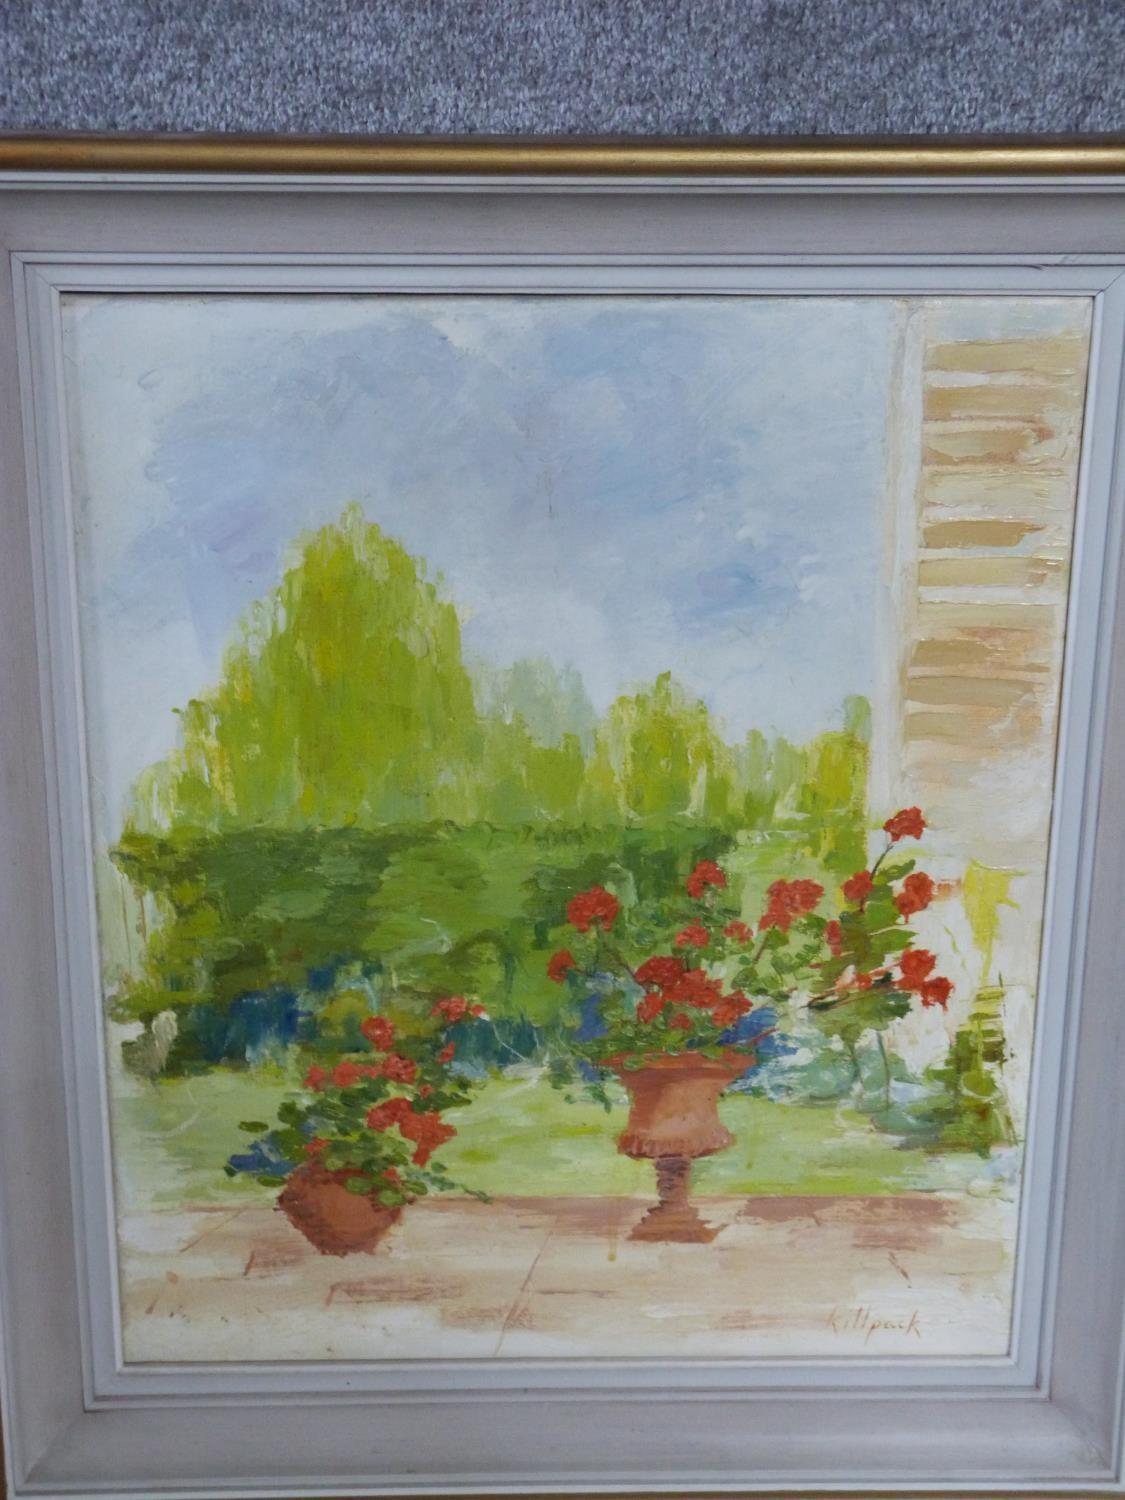 A framed oil on canvas by British artist Mona Killpack (16 March 1918 ? 6 May 2009). Titled 'Patio